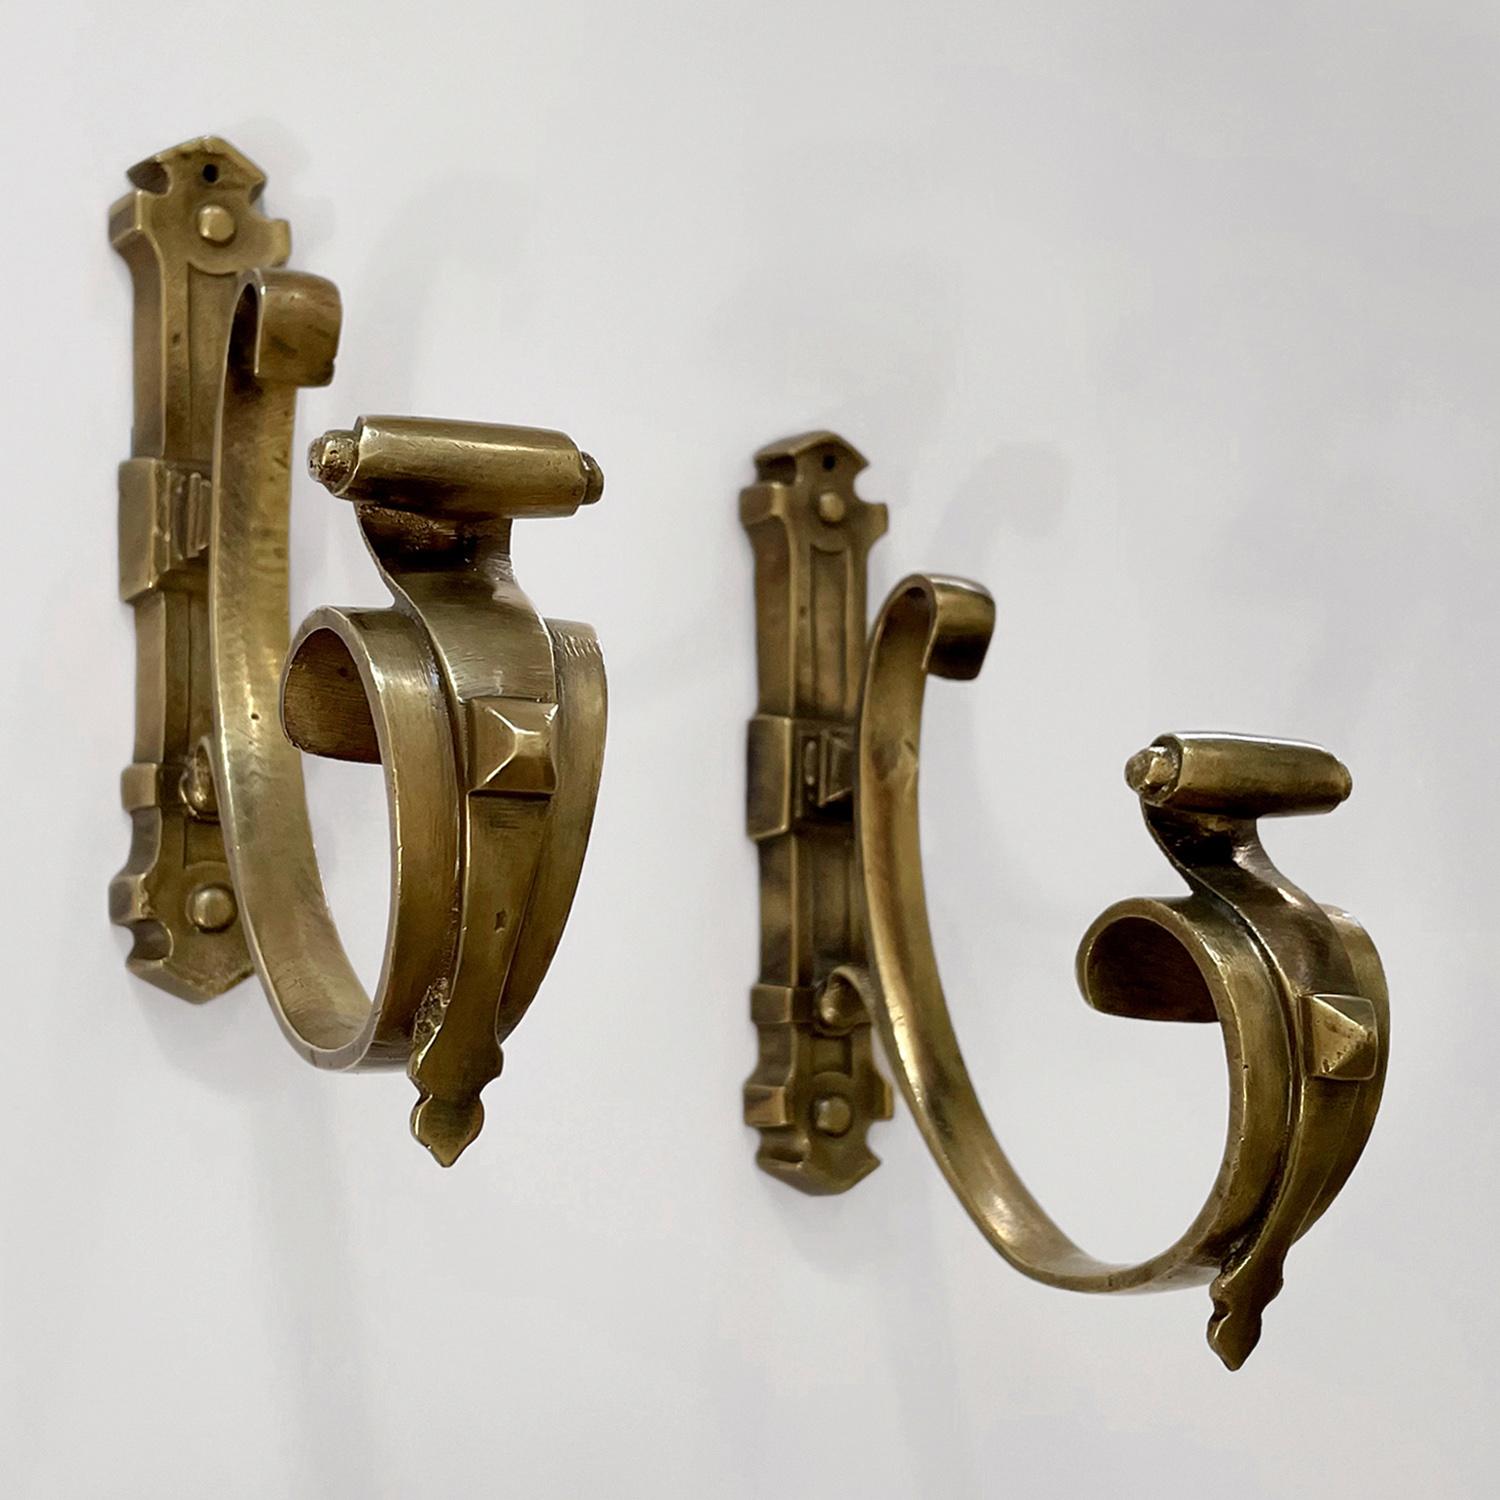 Pair of French bronze studded wall hooks
France, early 20th century
These beautifully sculpted bronze wall hooks are a dramatic statement piece
Wonderful attention to detail throughout
Heavy weight deep J hooks are adorned with studded rivets
Each